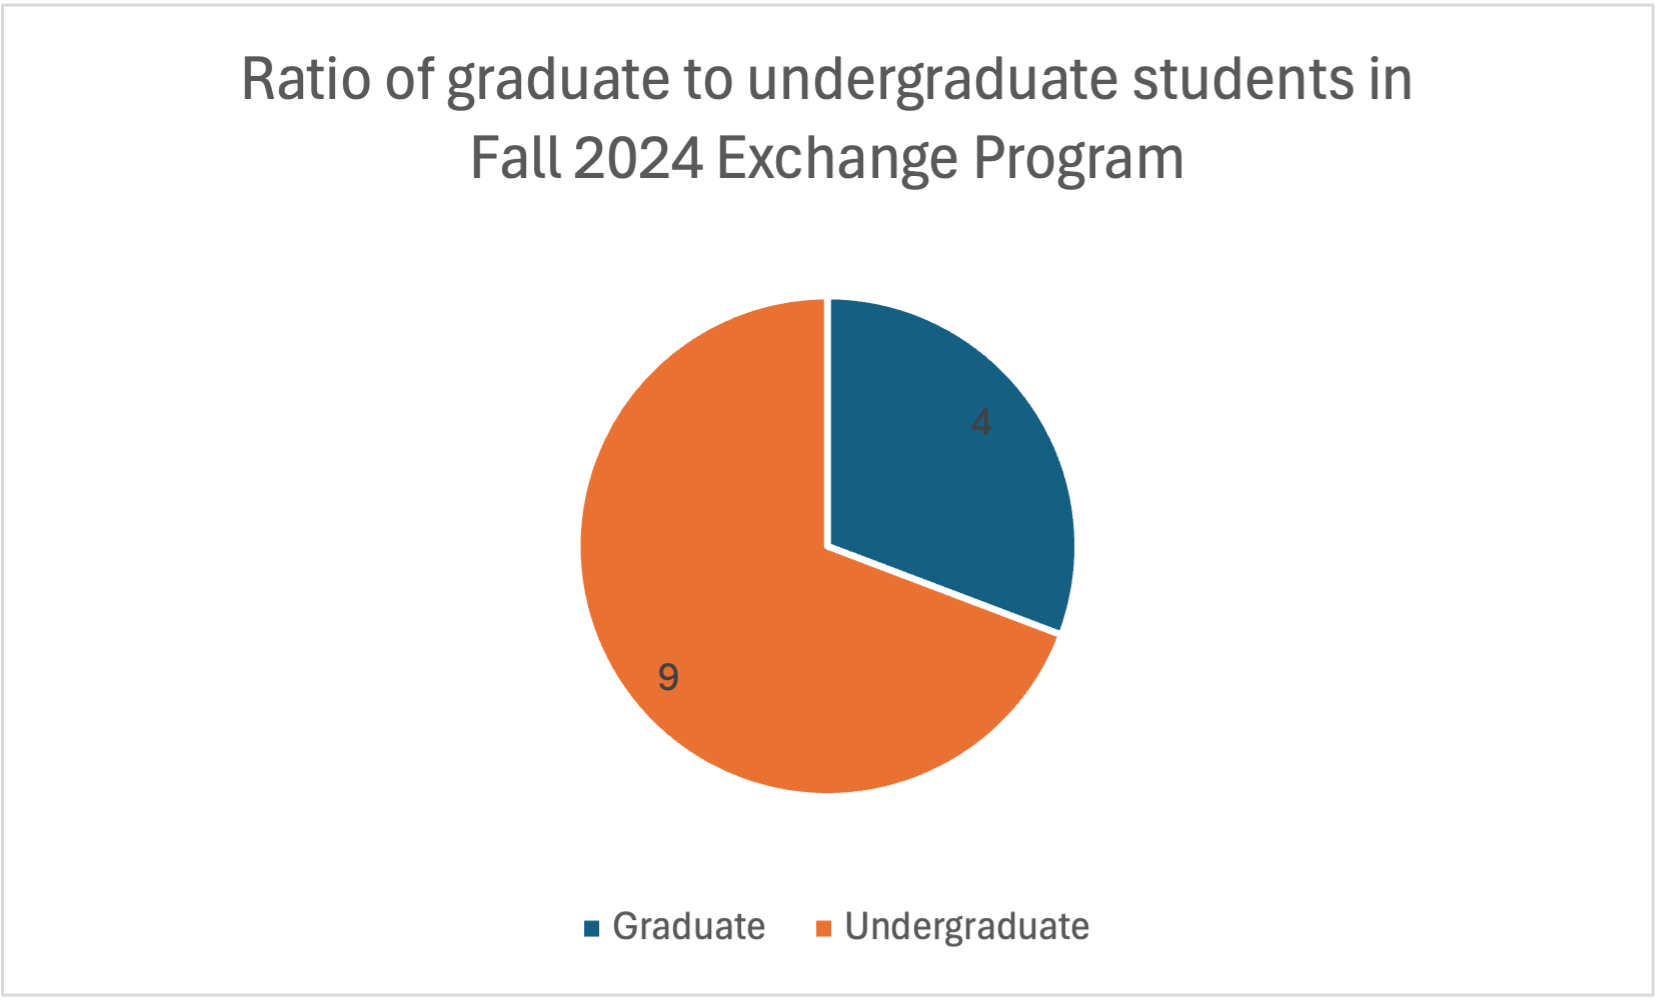 Pie chart depicting number of undergraduate to graduate students in Fall 2024 exchange program